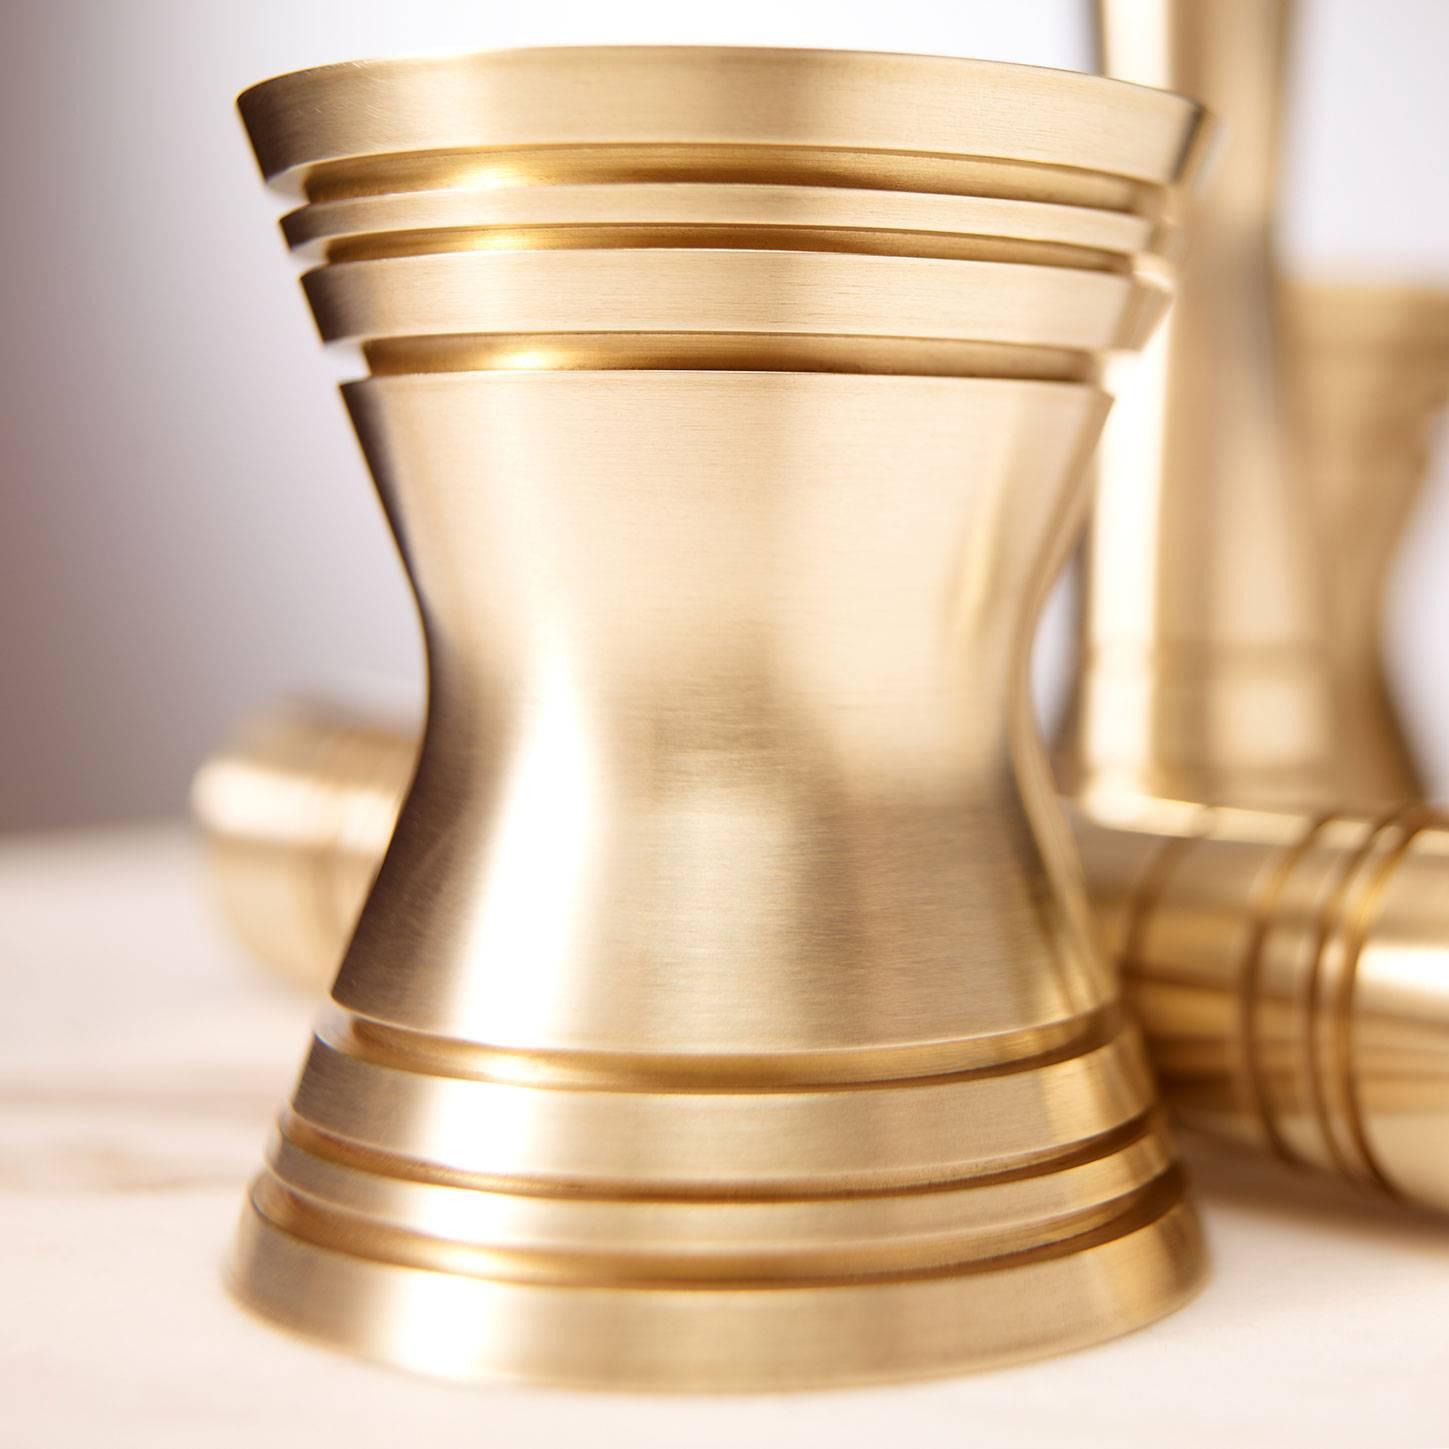 Mid-Century Modern inspired solid brass candleholders make for a substantial and elegant future heirloom. The polished brass reflects candlelight, enhancing the warmth and glow in your space, creating a soft, comforting atmosphere. 
Mix and match